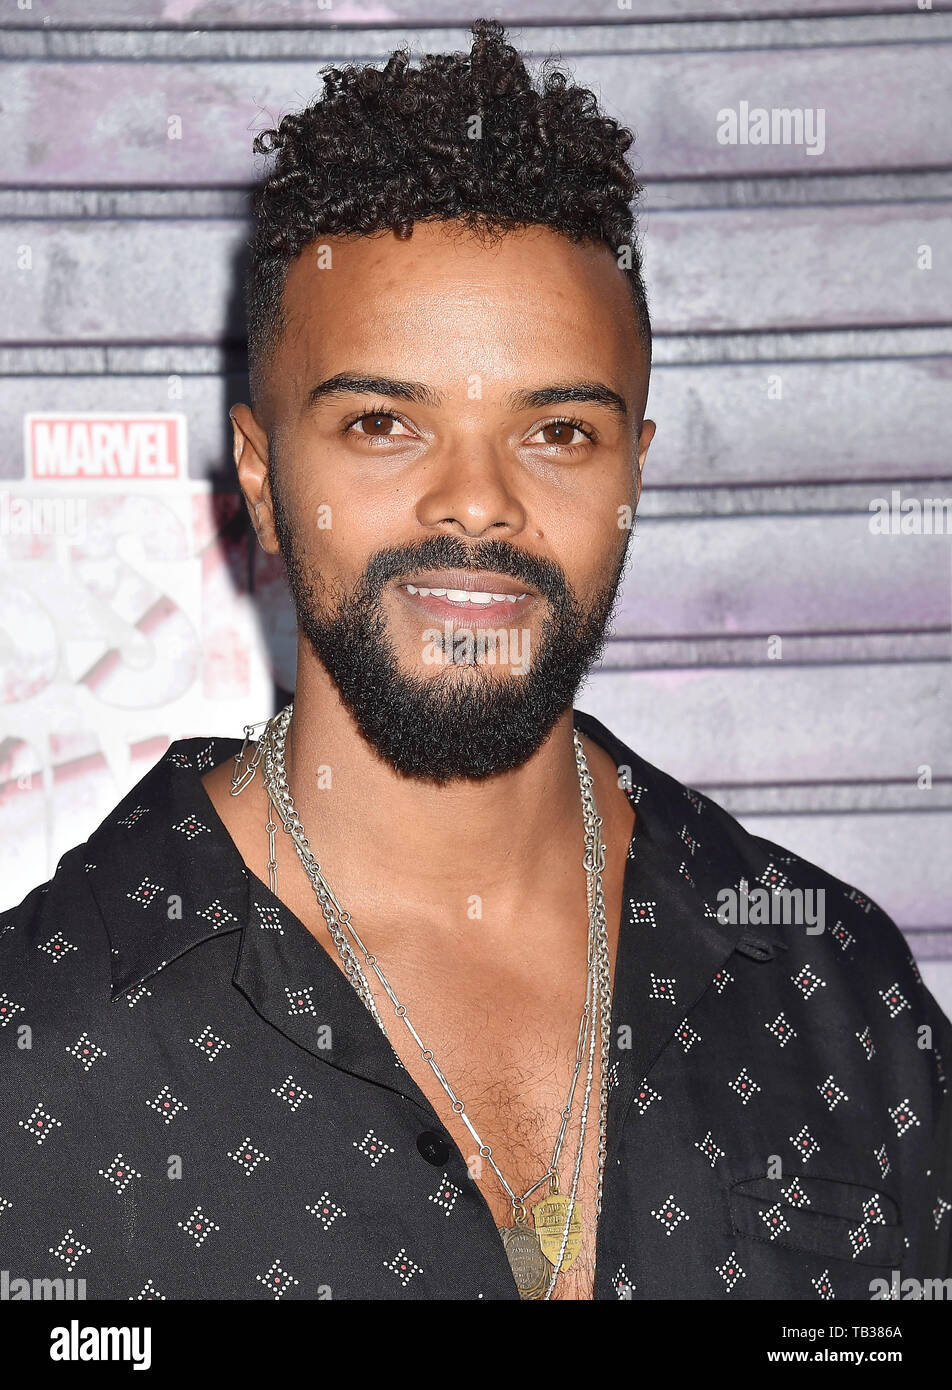 HOLLYWOOD, CA - MAY 28: Eka Darville attends a Special Screening Of Netflix's 'Jessica Jones' Season 3 at ArcLight Hollywood on May 28, 2019 in Hollywood, California. Stock Photo